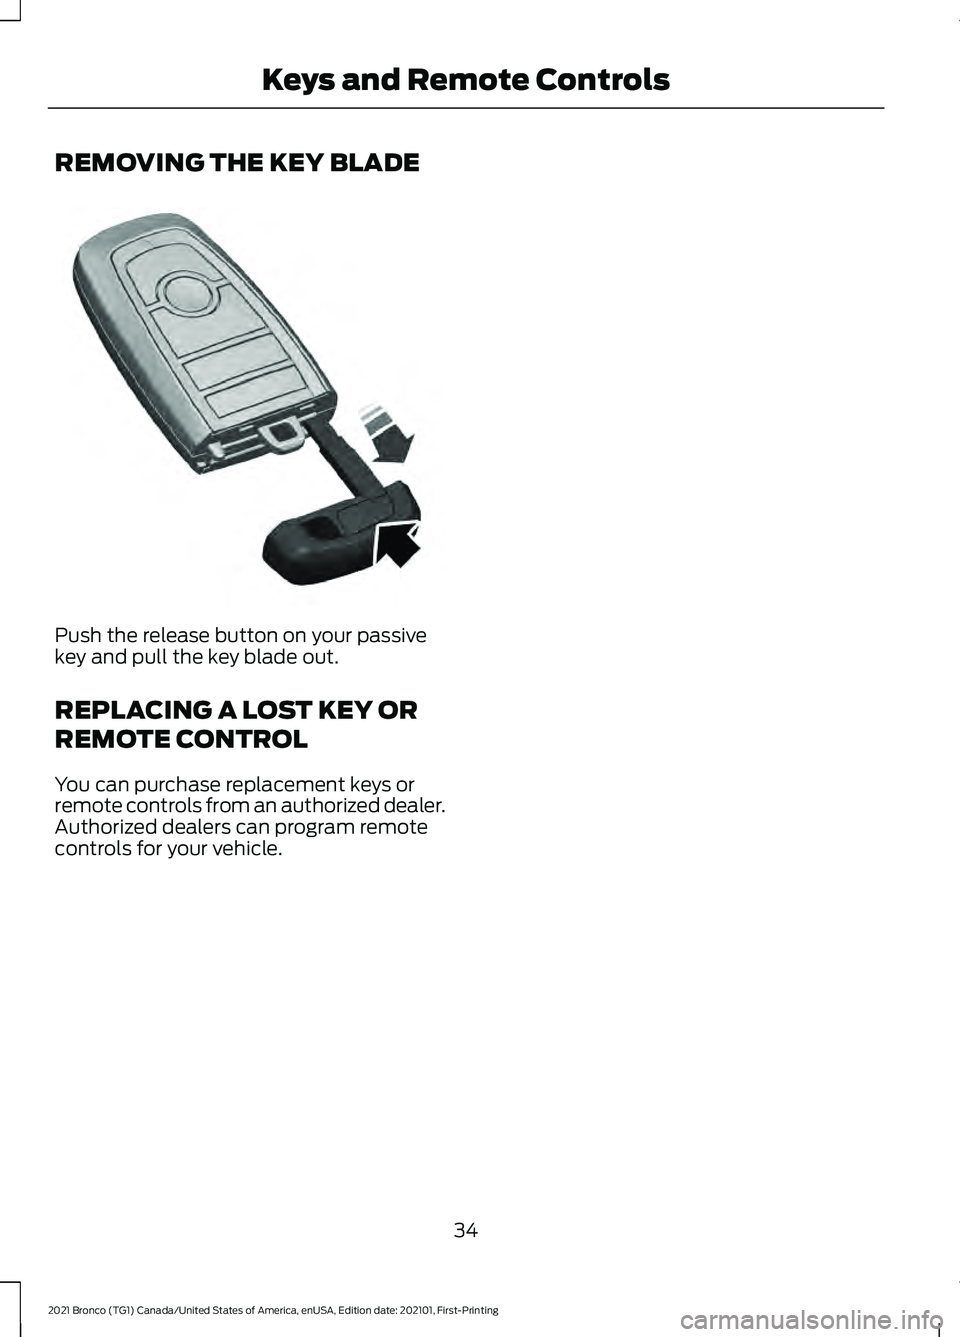 FORD BRONCO 2021  Warranty Guide REMOVING THE KEY BLADE
Push the release button on your passive
key and pull the key blade out.
REPLACING A LOST KEY OR
REMOTE CONTROL
You can purchase replacement keys or
remote controls from an autho